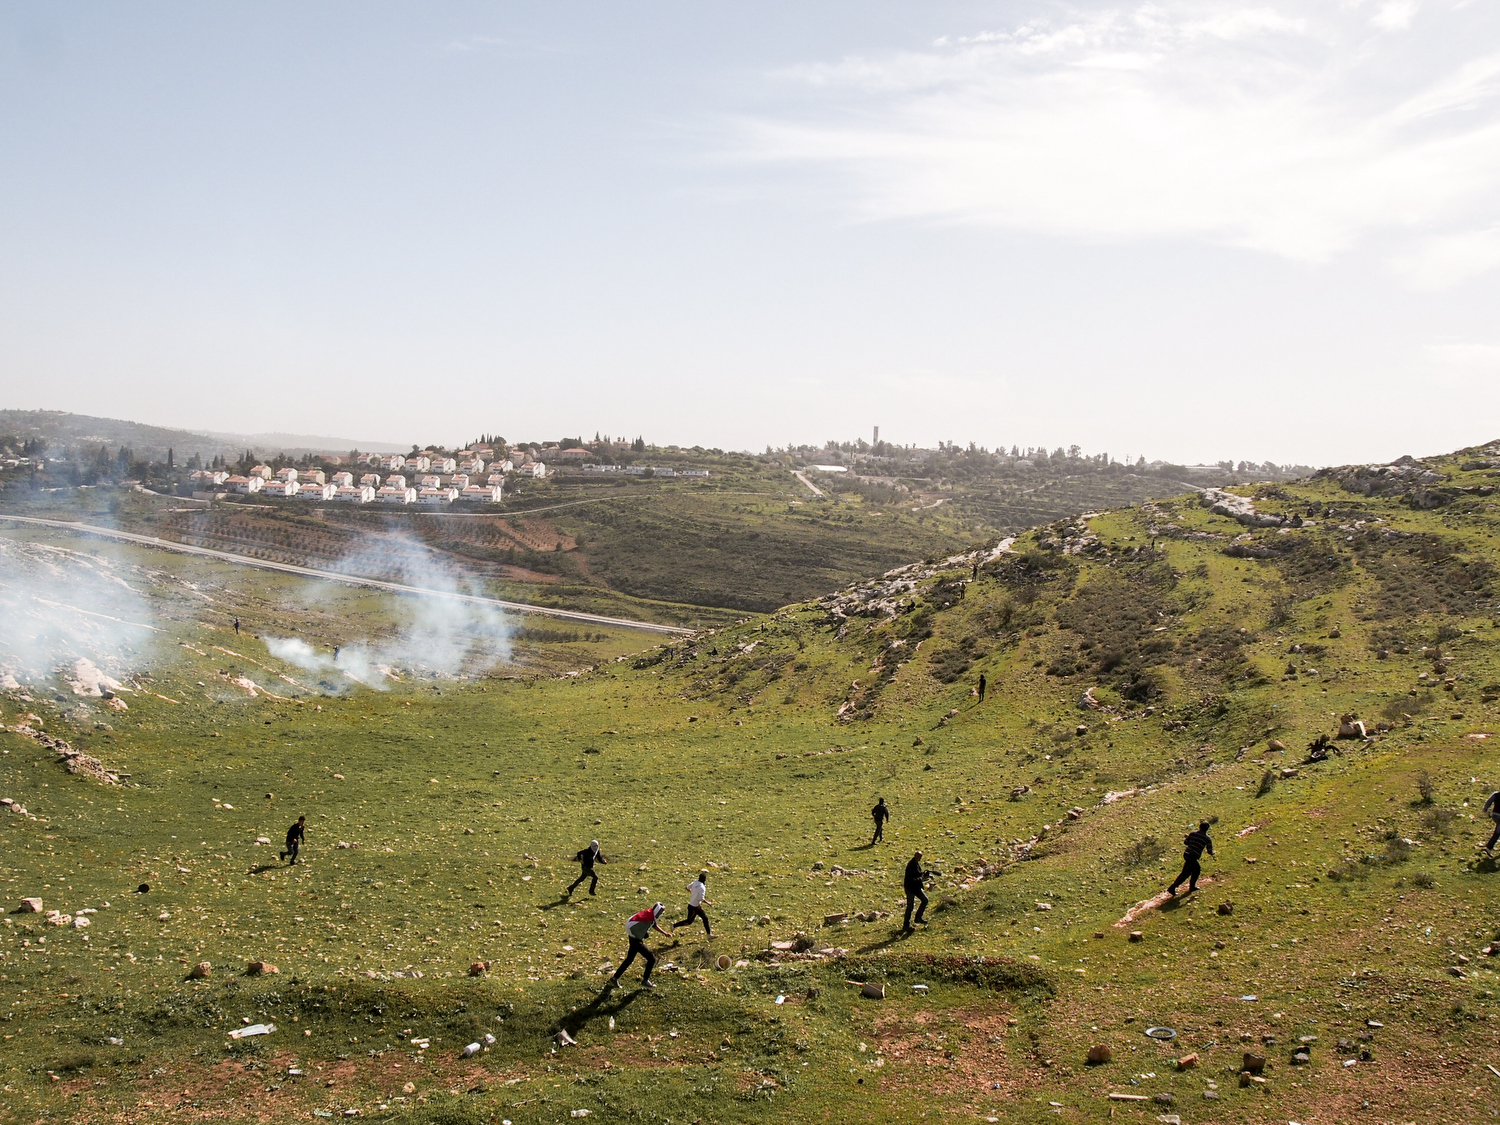 West Bank.  Nabi Saleh.  2013.  Protestors run away as Israeli soldiers fire tear gas at them.  The Israeli settlement of Halimish is in the background. Residents of Nabi Saleh have been protesting the Israeli Occupation every Friday after midday prayers since 2009.  The protests started after Israelis from the nearby settlement of Halimish took over a small spring that had been on Palestinian land.  After widening and adding a bench to the spring, the settlers refused to allow the Palestinians to continue using it.  The weekly protests quickly devolve into rock throwing by the Palestinians and tear gas, rubber bullets, and 'skunk' (a spray mixed with water that has a horrific stench that can linger for weeks) in response by the Israelis.